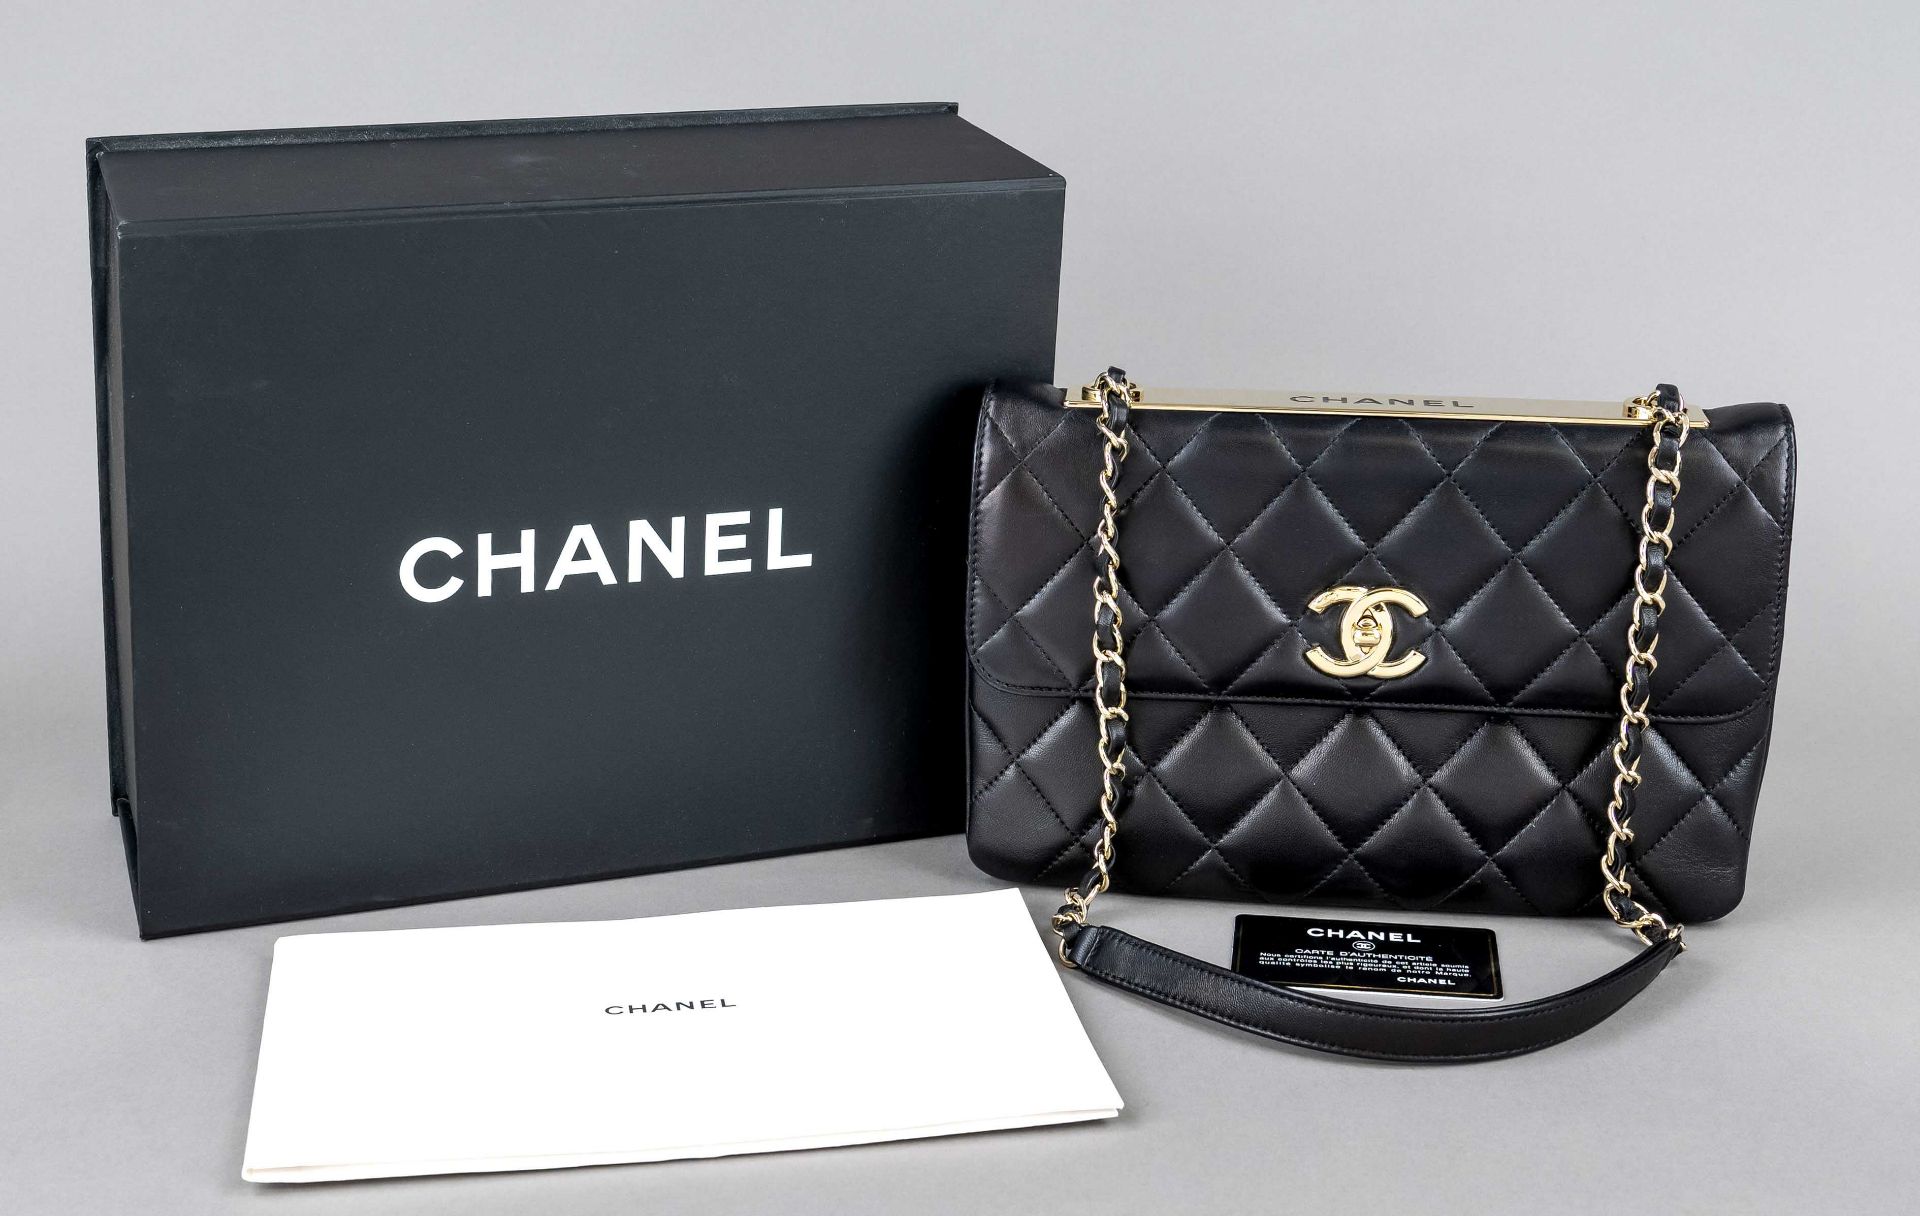 Chanel, Quilted Lambskin Trendy CC Medium Flap Bag, black quilted and padded lambskin in brand's